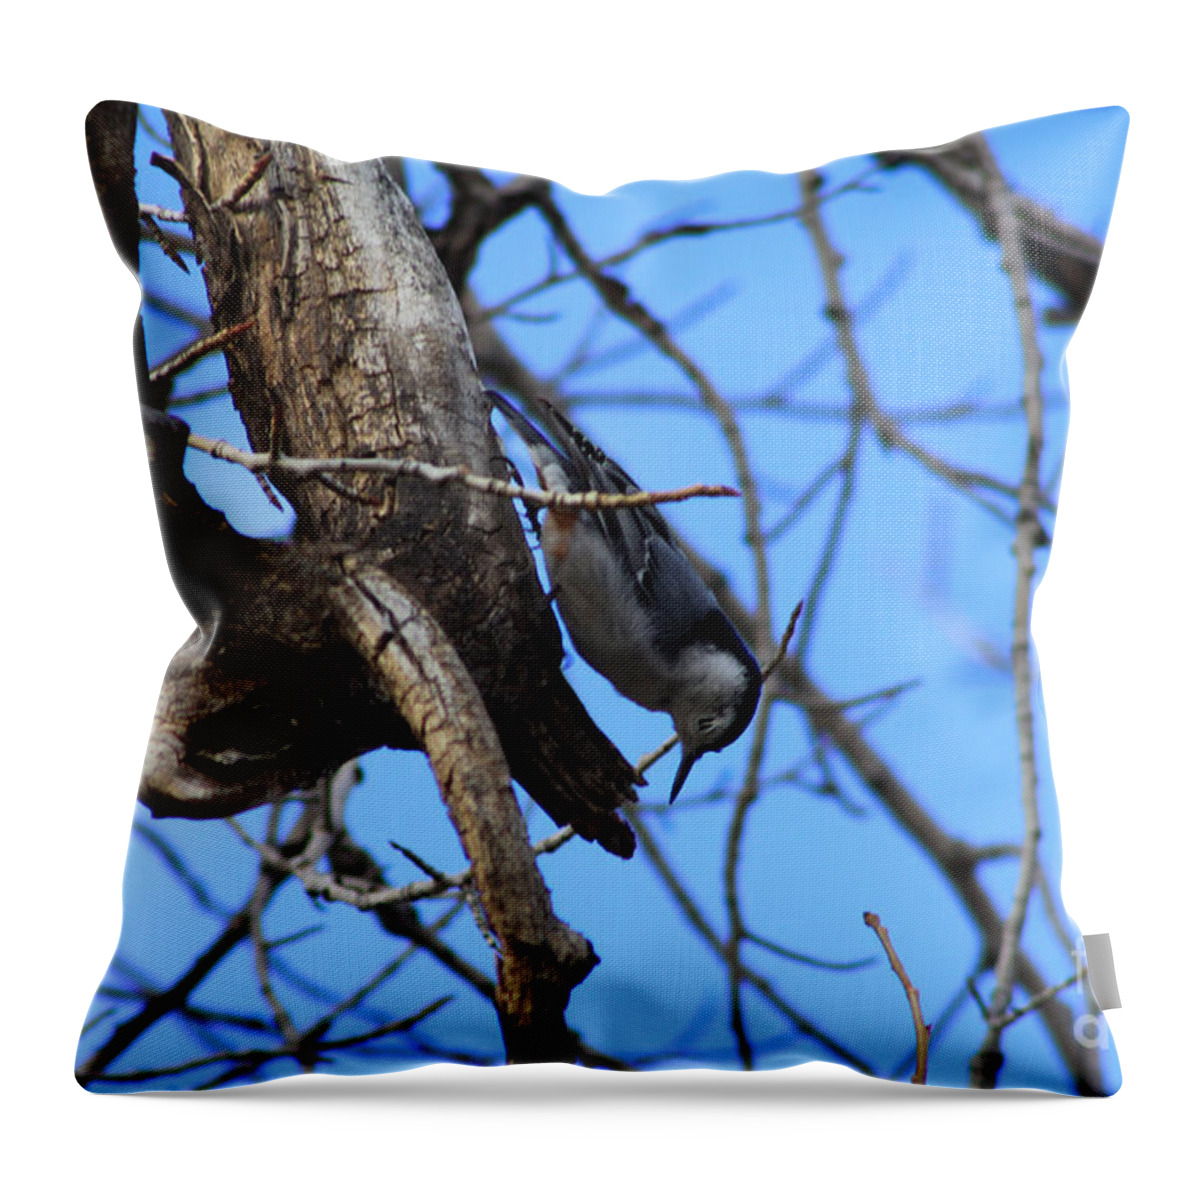 Bird Throw Pillow featuring the photograph Hanging in the Park by Alyce Taylor